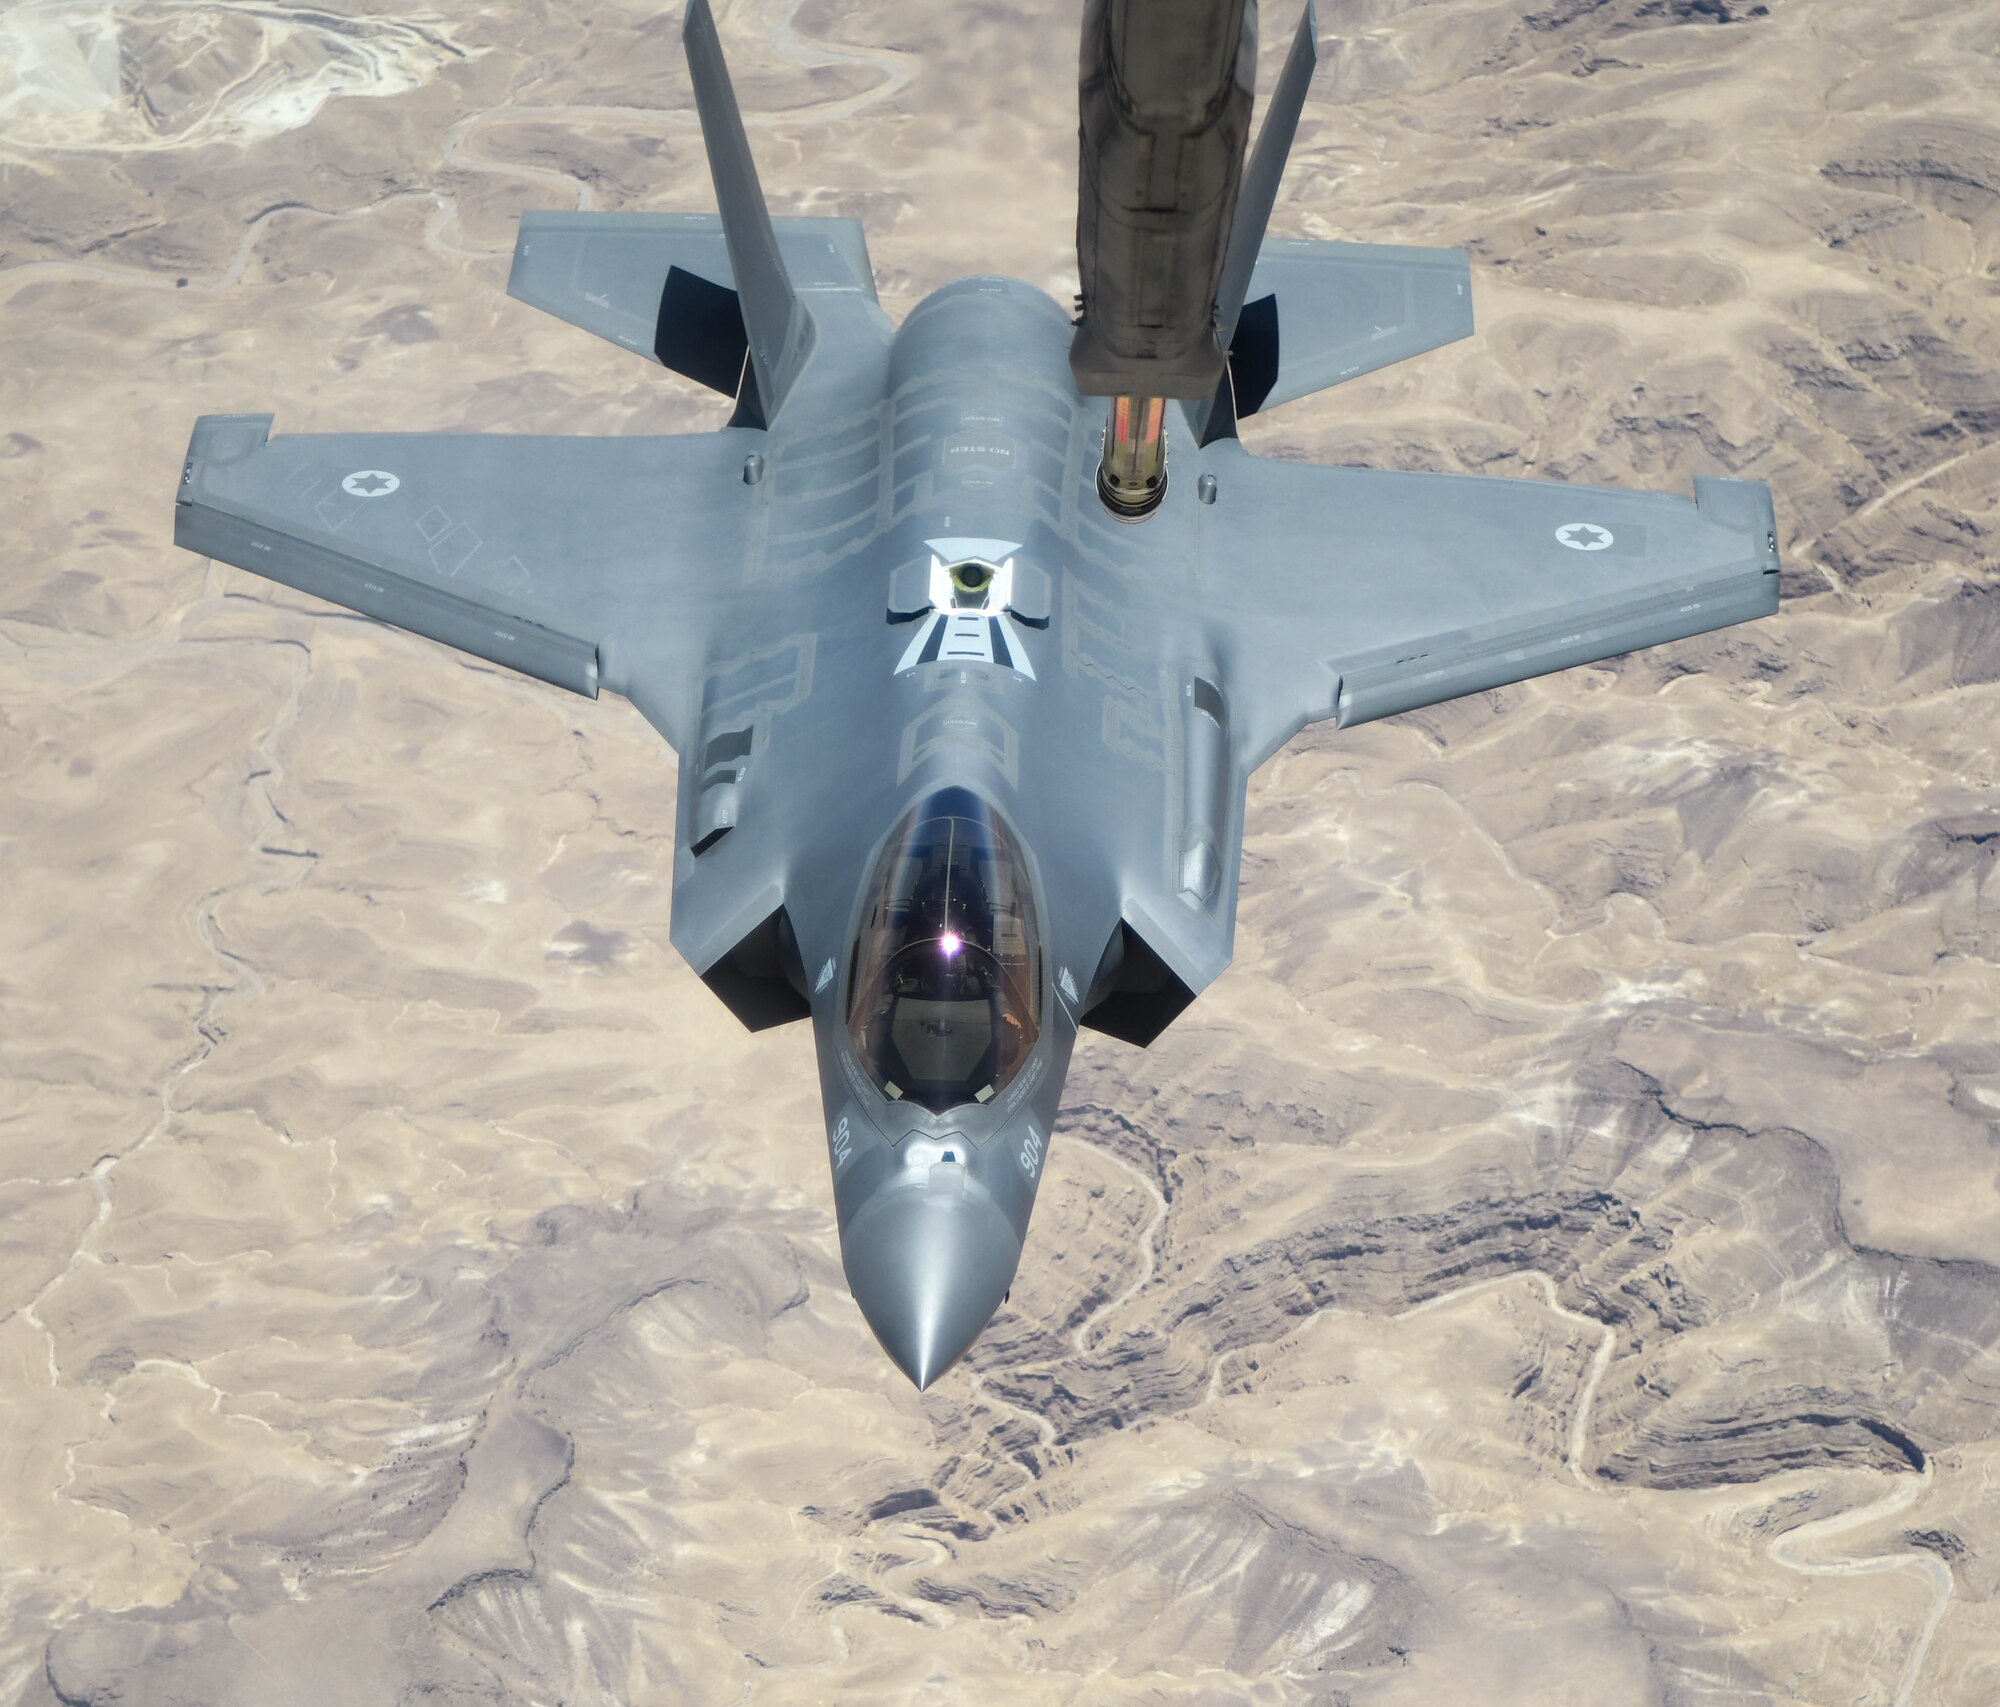 An Israeli Air Force F-35I Lightning II “Adir” approaches a U.S. Air Force 908th Expeditionary Refueling Squadron KC-10 Extender to refuel during “Enduring Lightning II” exercise over southern Israel Aug. 2, 2020. While forging a resolute partnership, the allies train to maintain a ready posture to deter against regional aggressors.  (U.S. Air Force photo by Tech. Sgt. Charles Taylor)